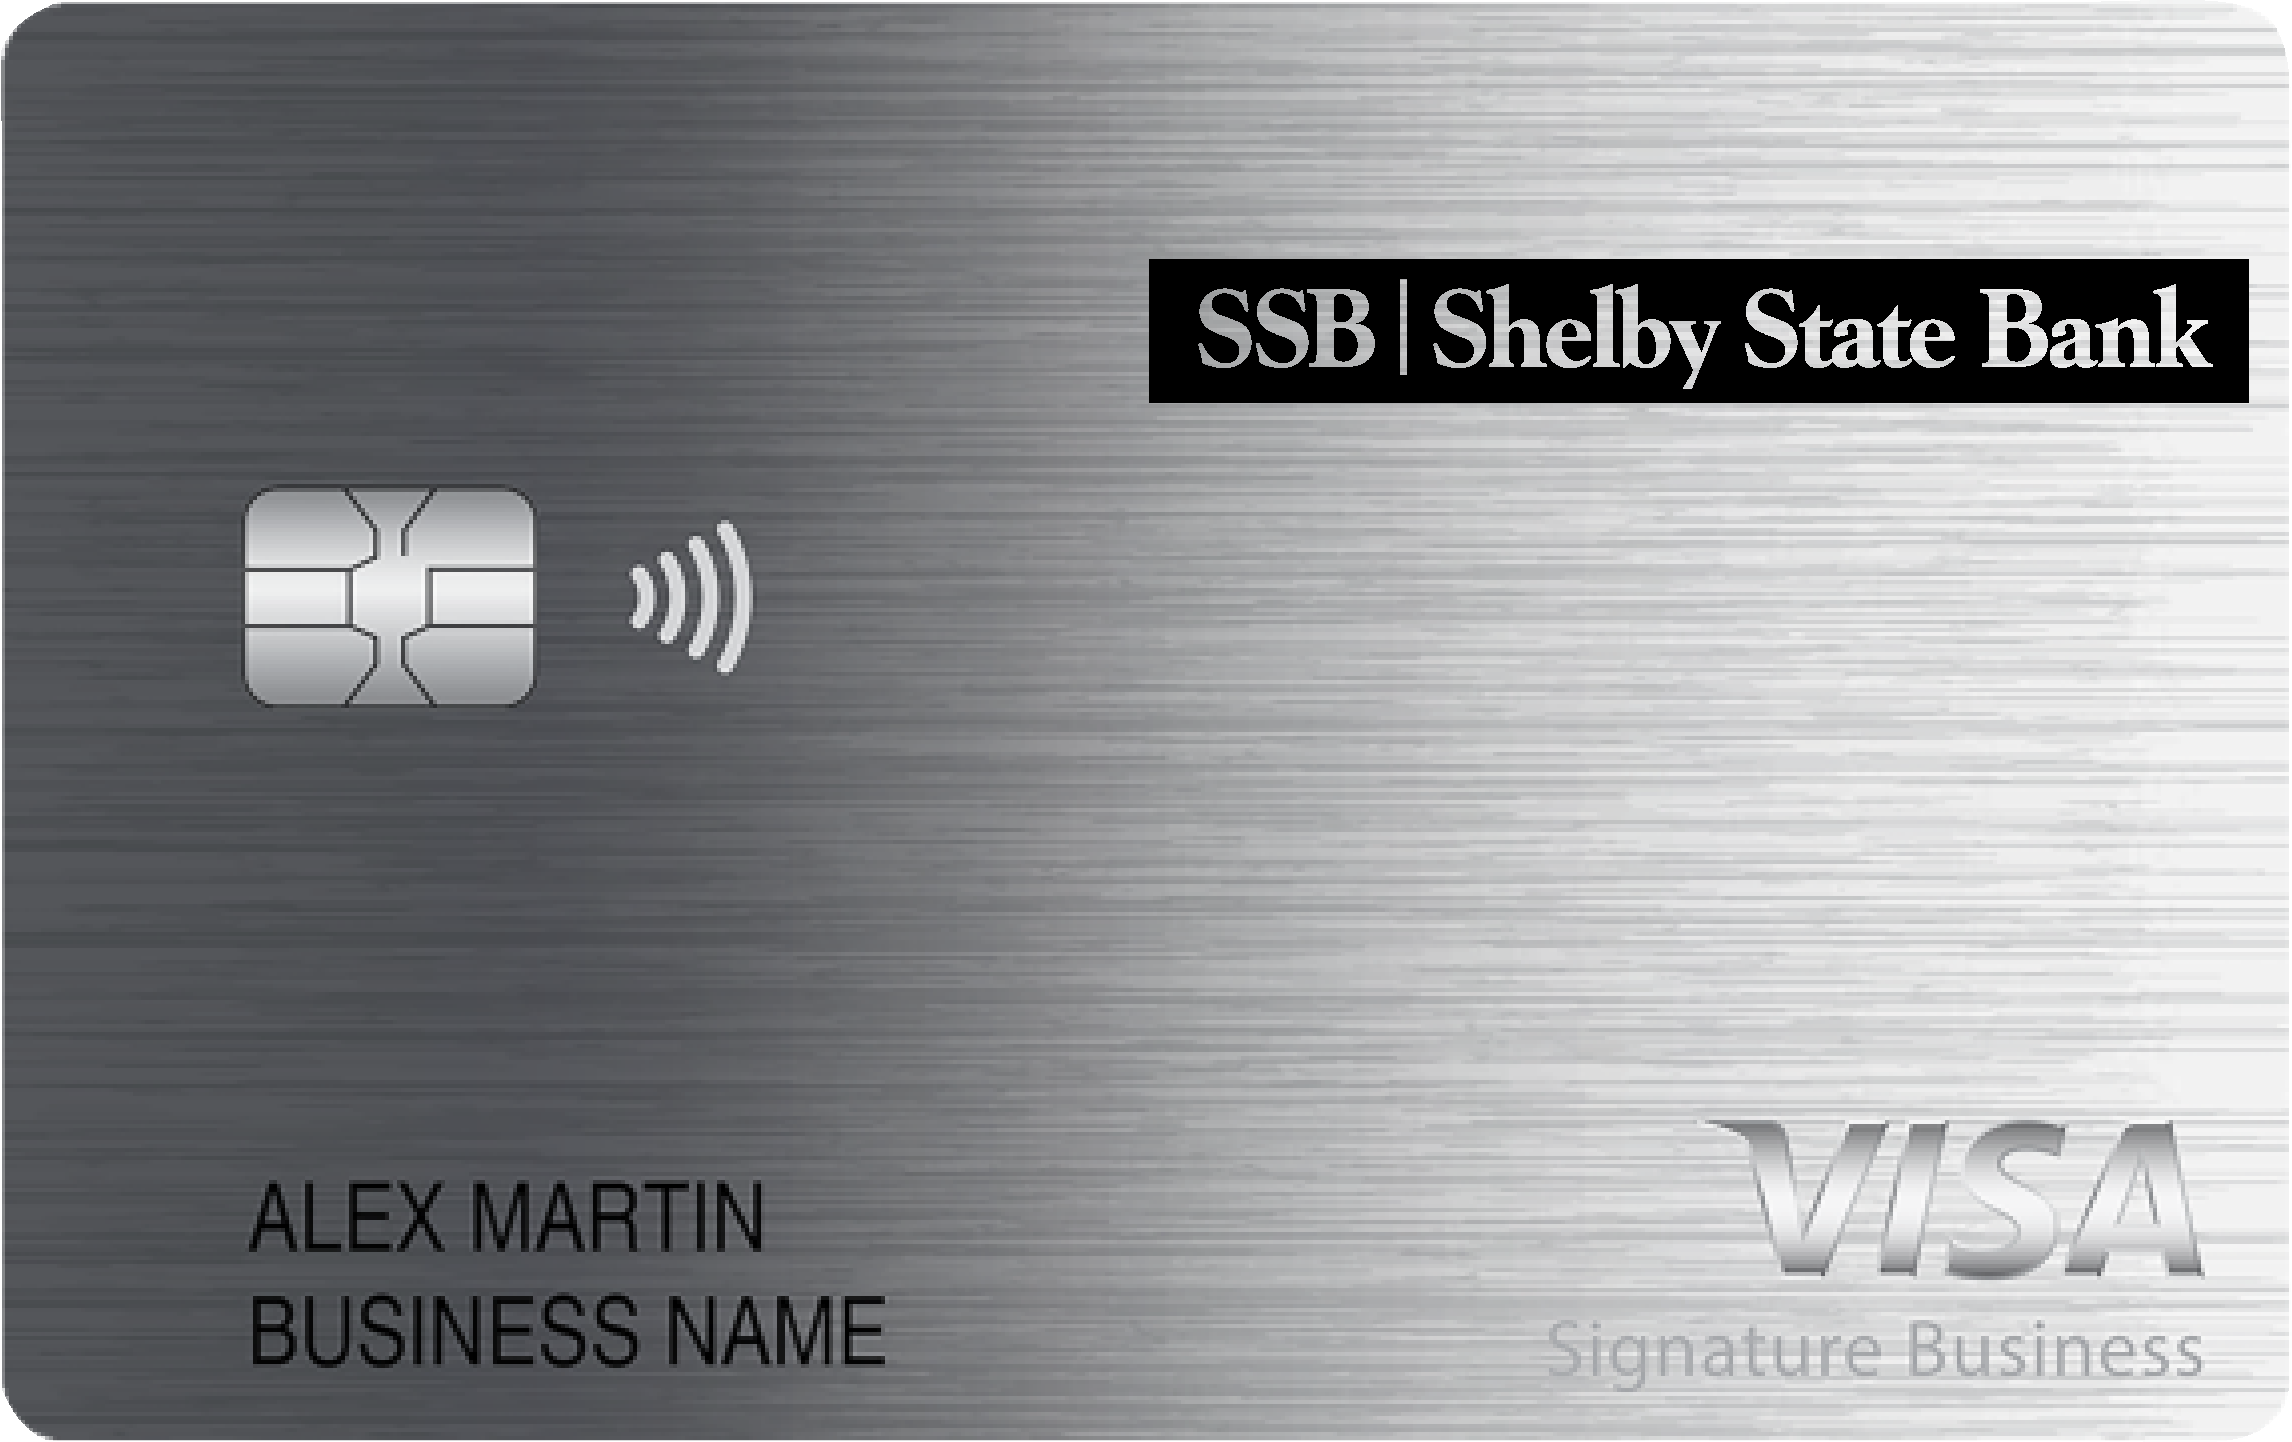 Shelby State Bank Smart Business Rewards Card